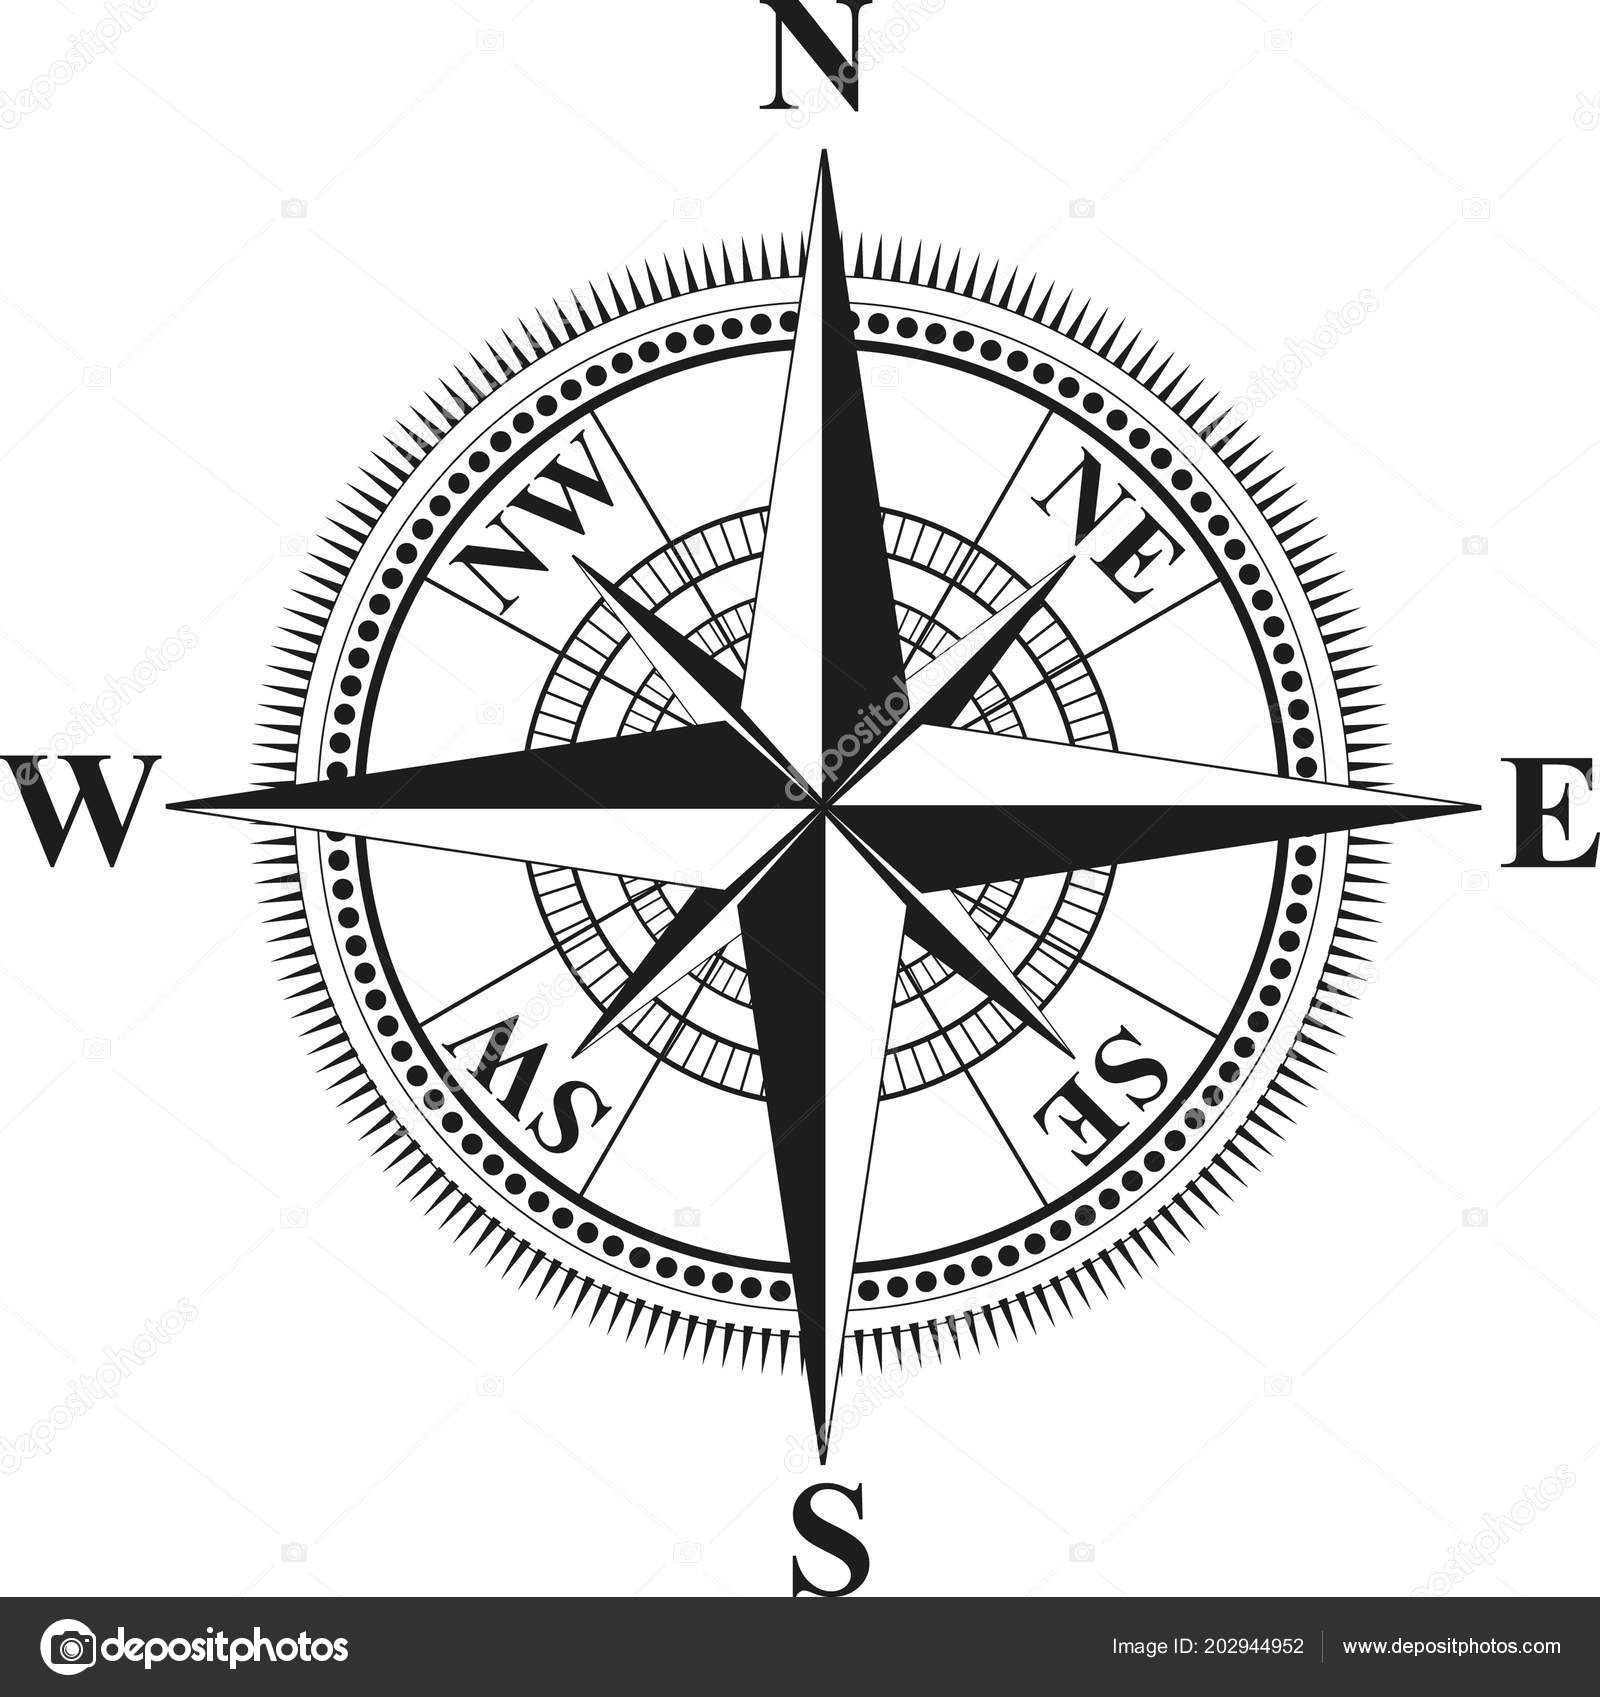 89805 Compass Drawing Images Stock Photos  Vectors  Shutterstock